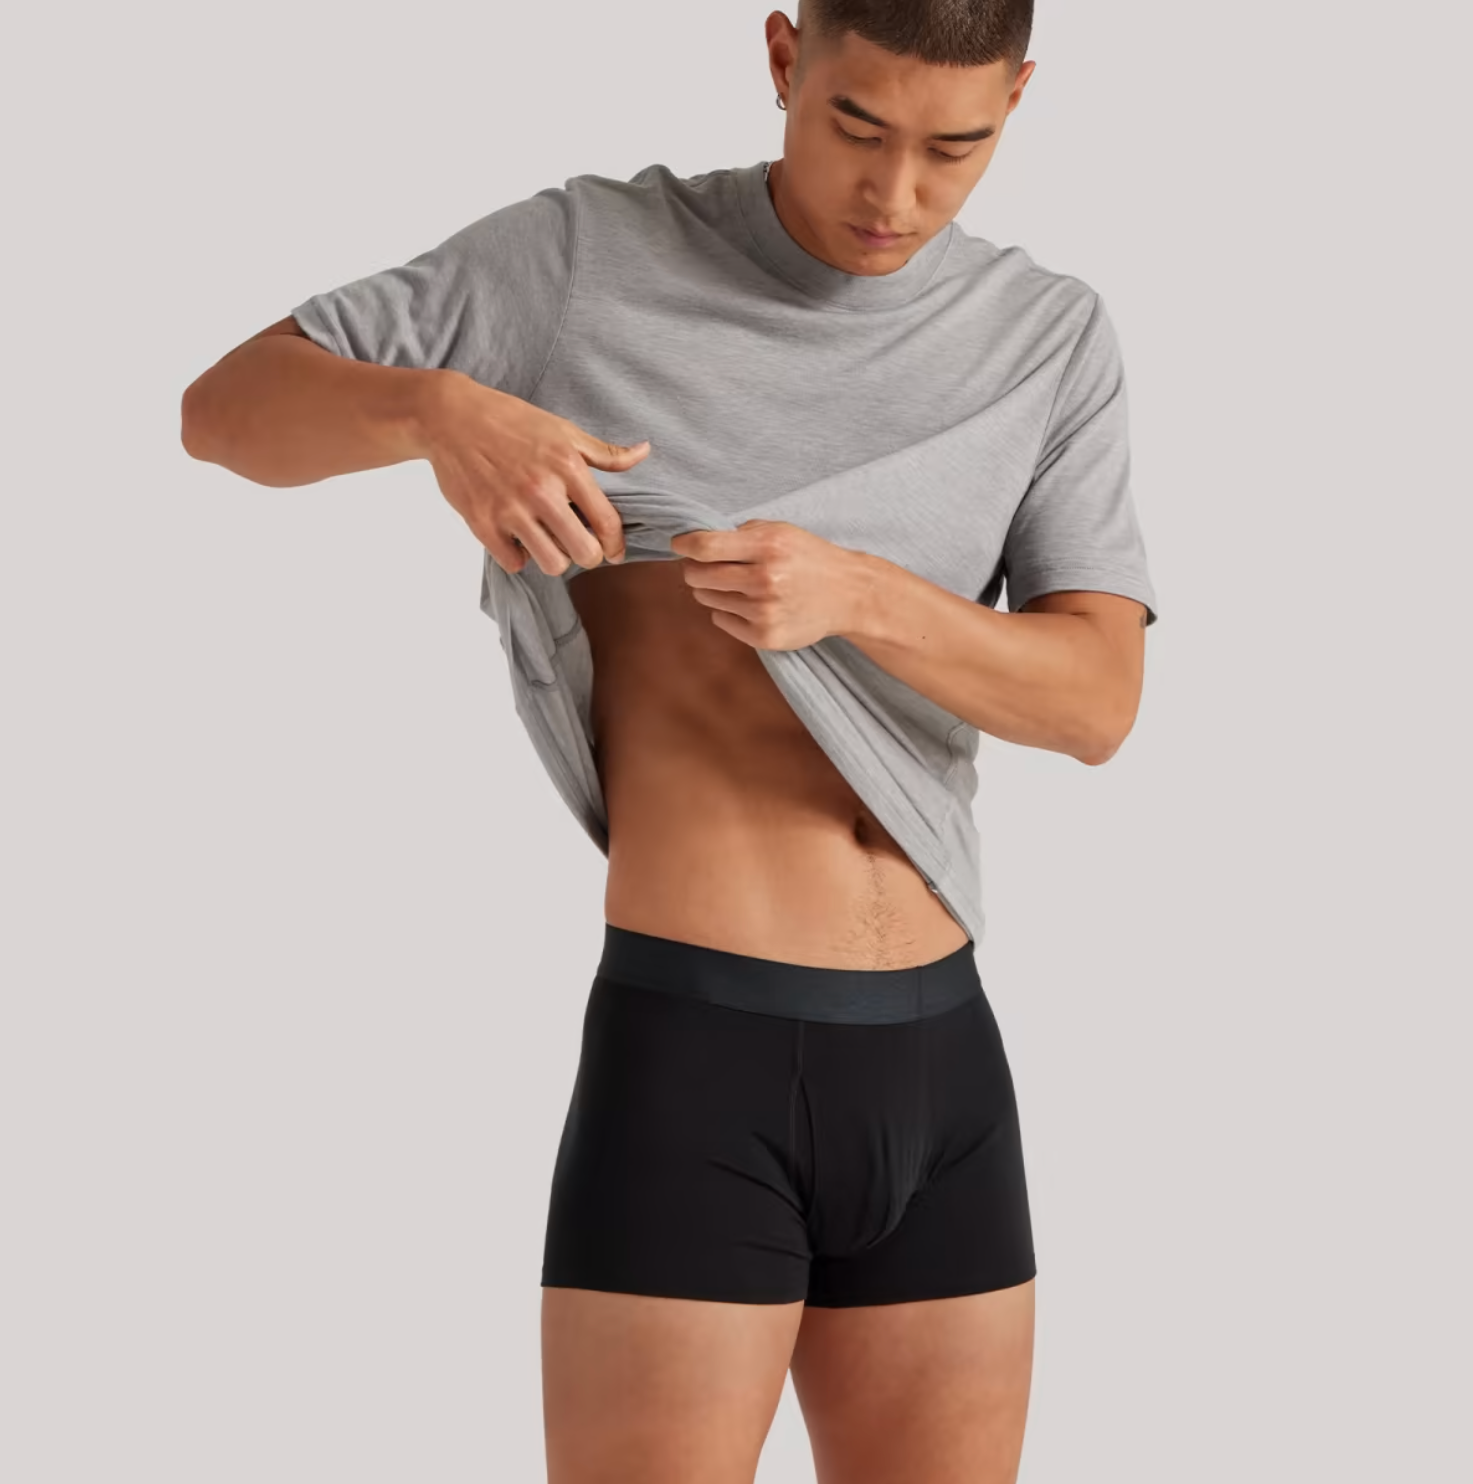 A model holds up his gray t-shirt to show off his black boxer briefs.